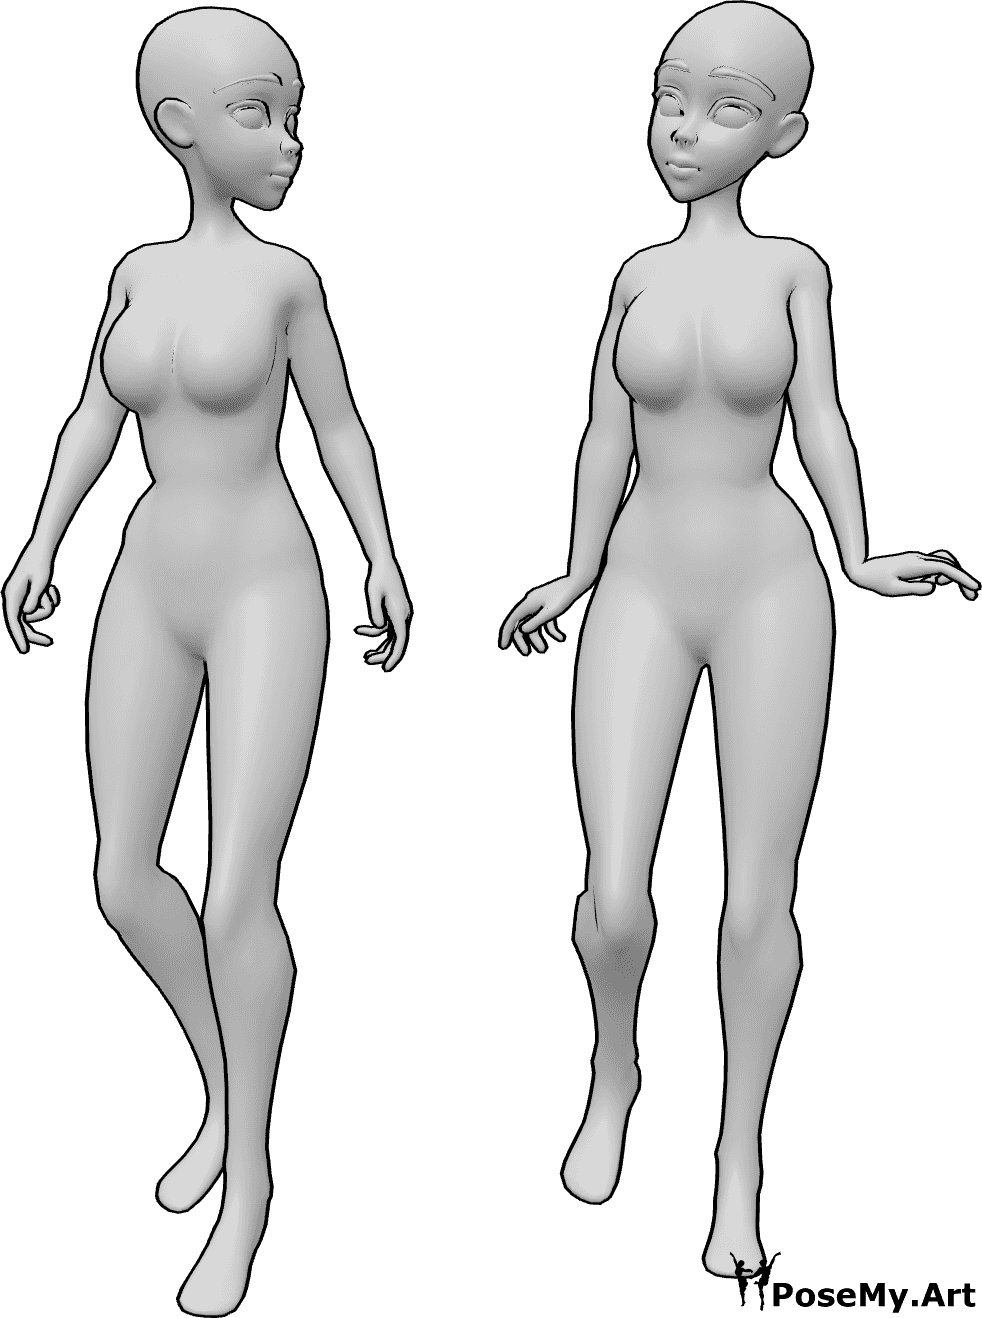 Anime Bodies Drawing Pictures - Drawing Skill-demhanvico.com.vn